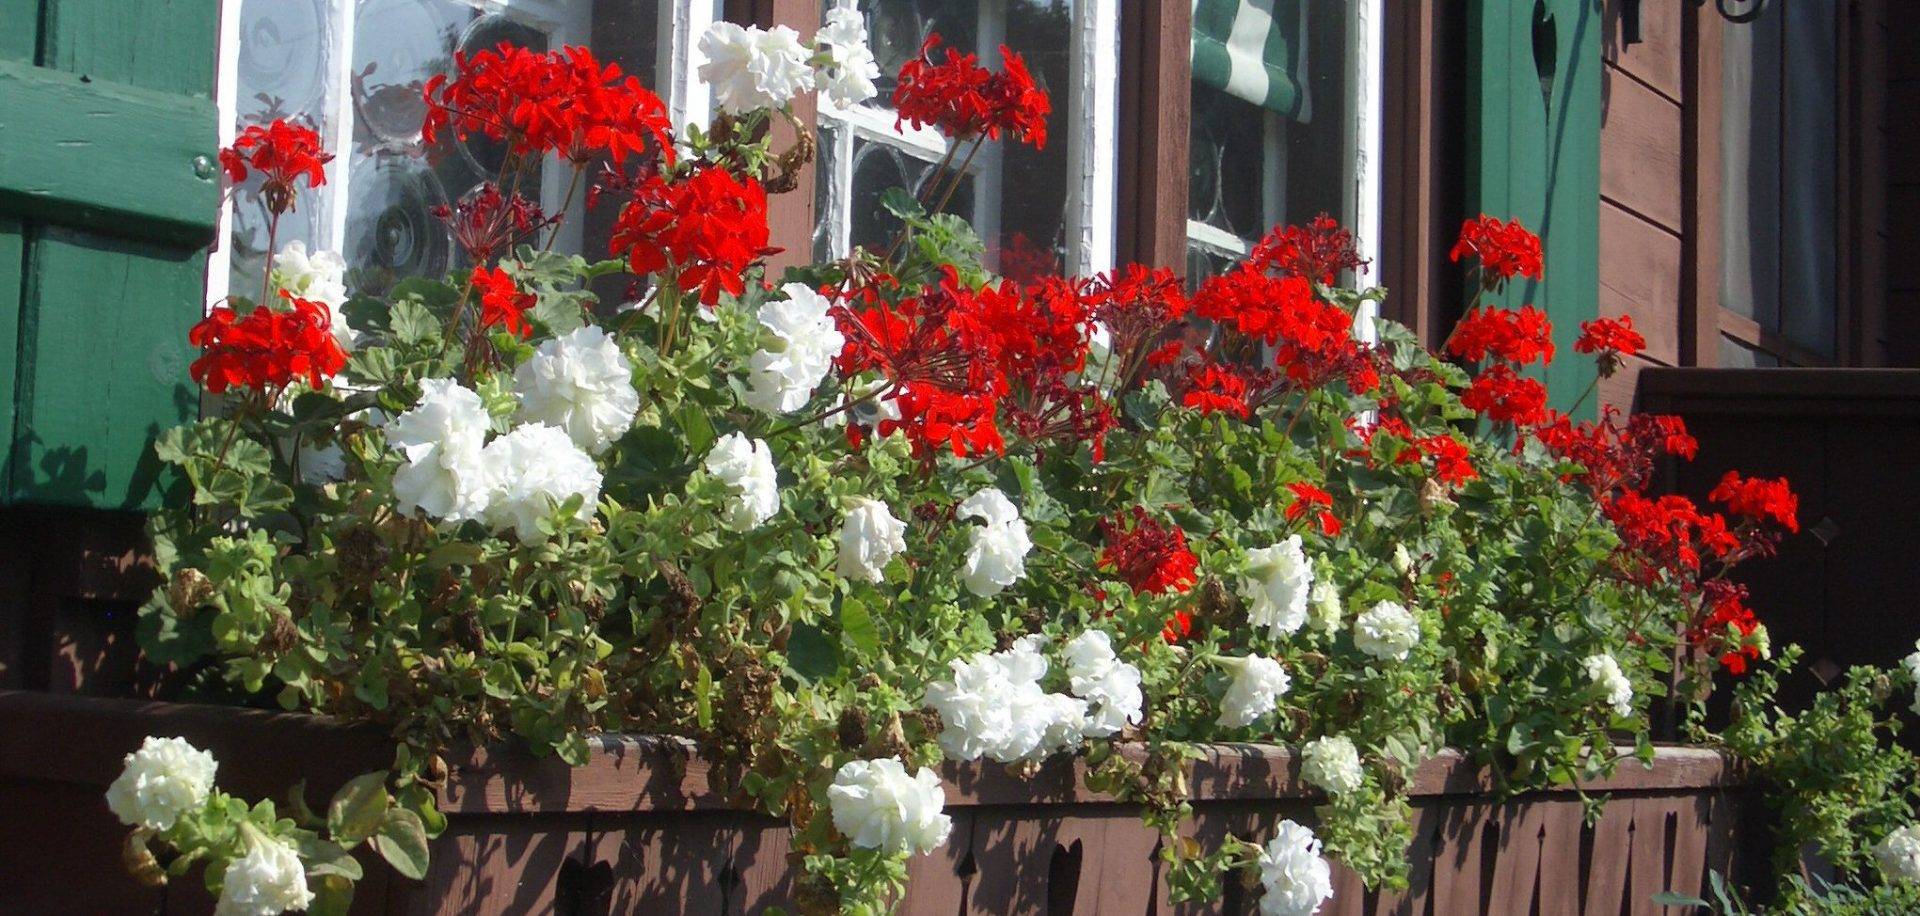 Flowers in a window planter watered by automatic planter and hanging basket watering system